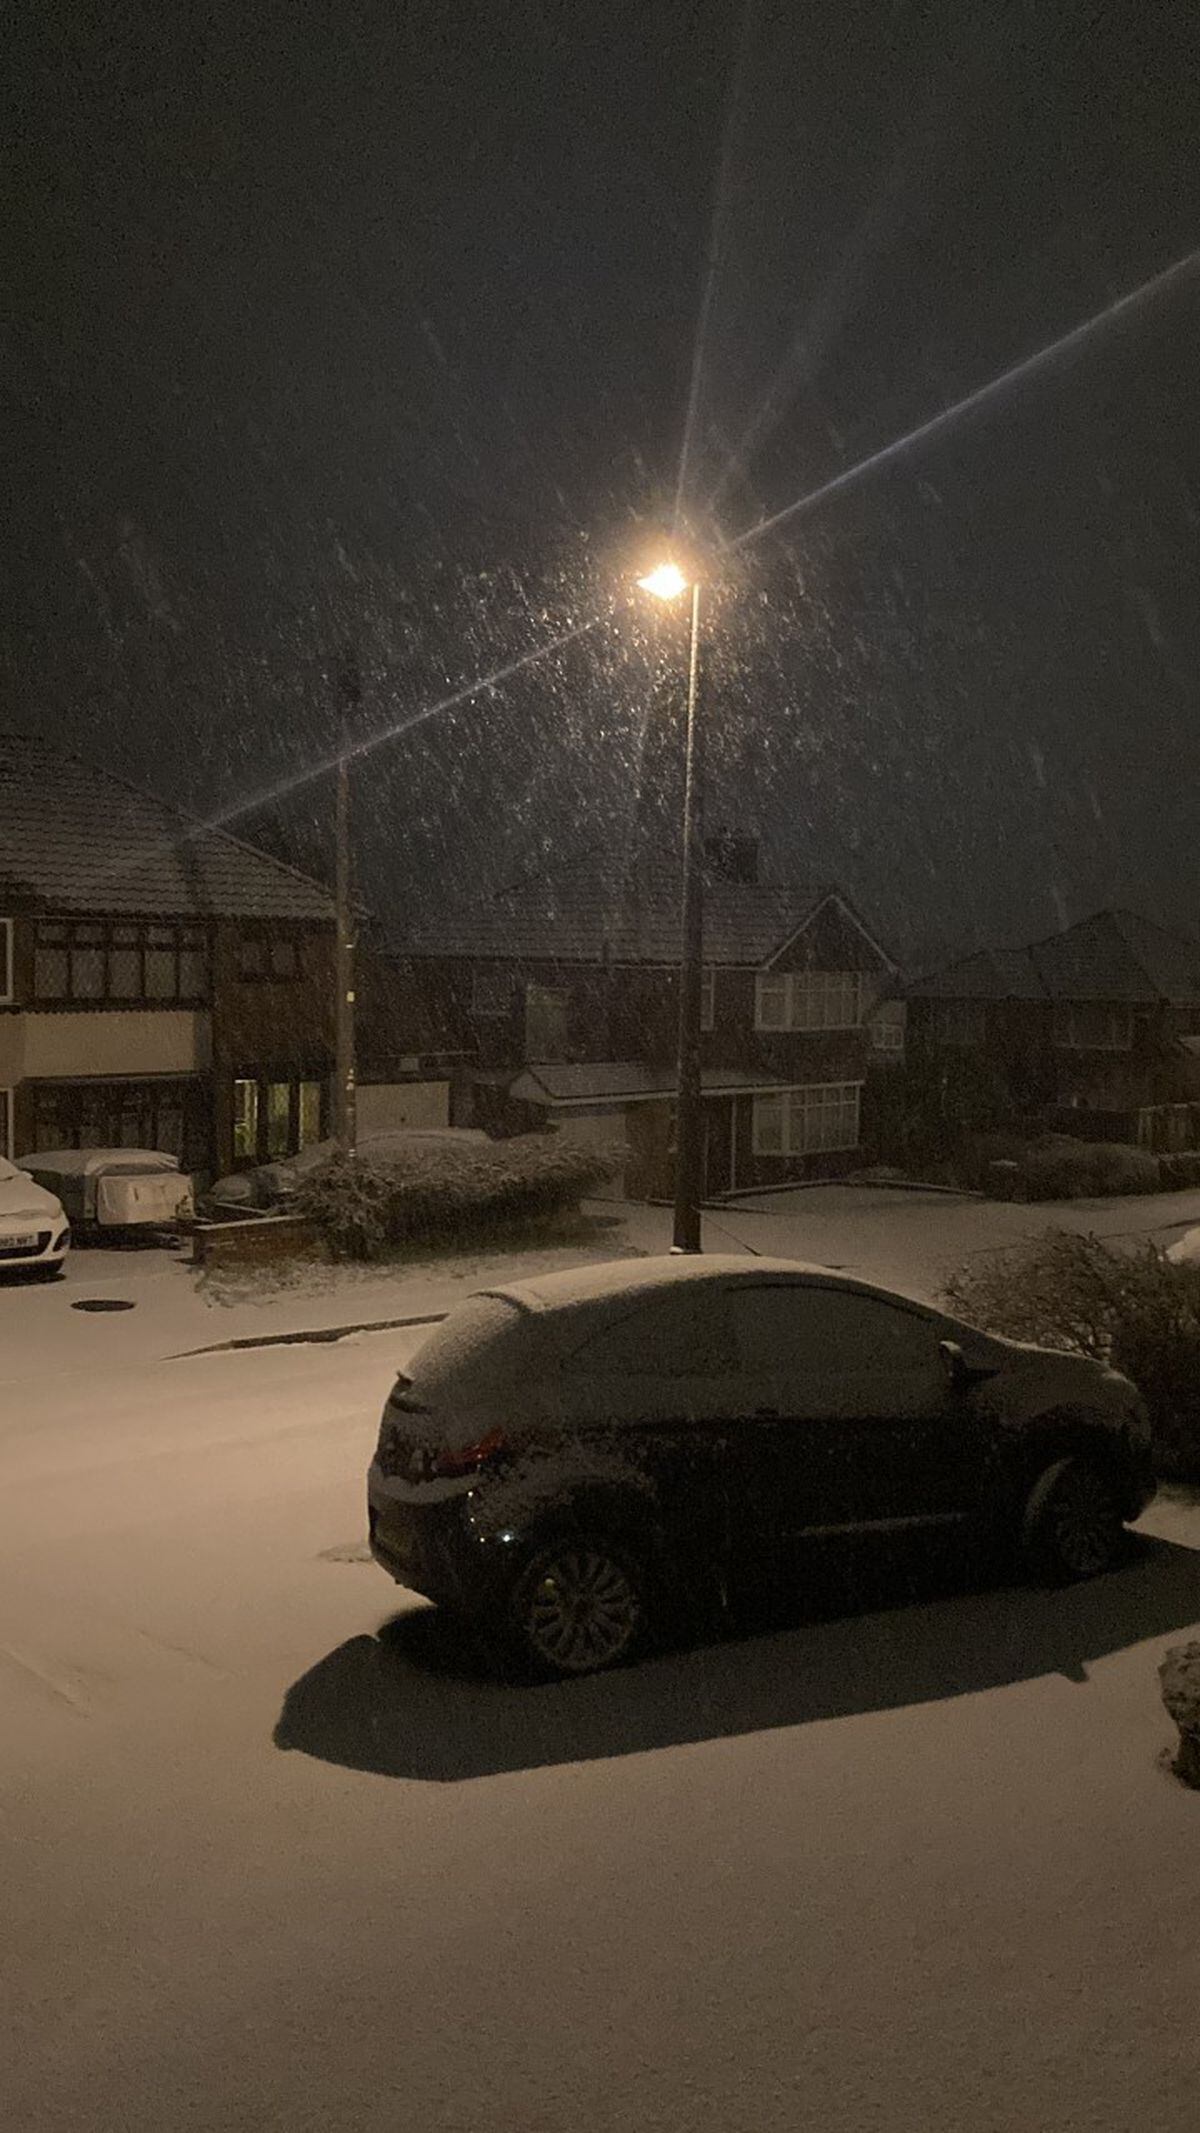 Snow falling on Dumbleberry Avenue in Sedgley